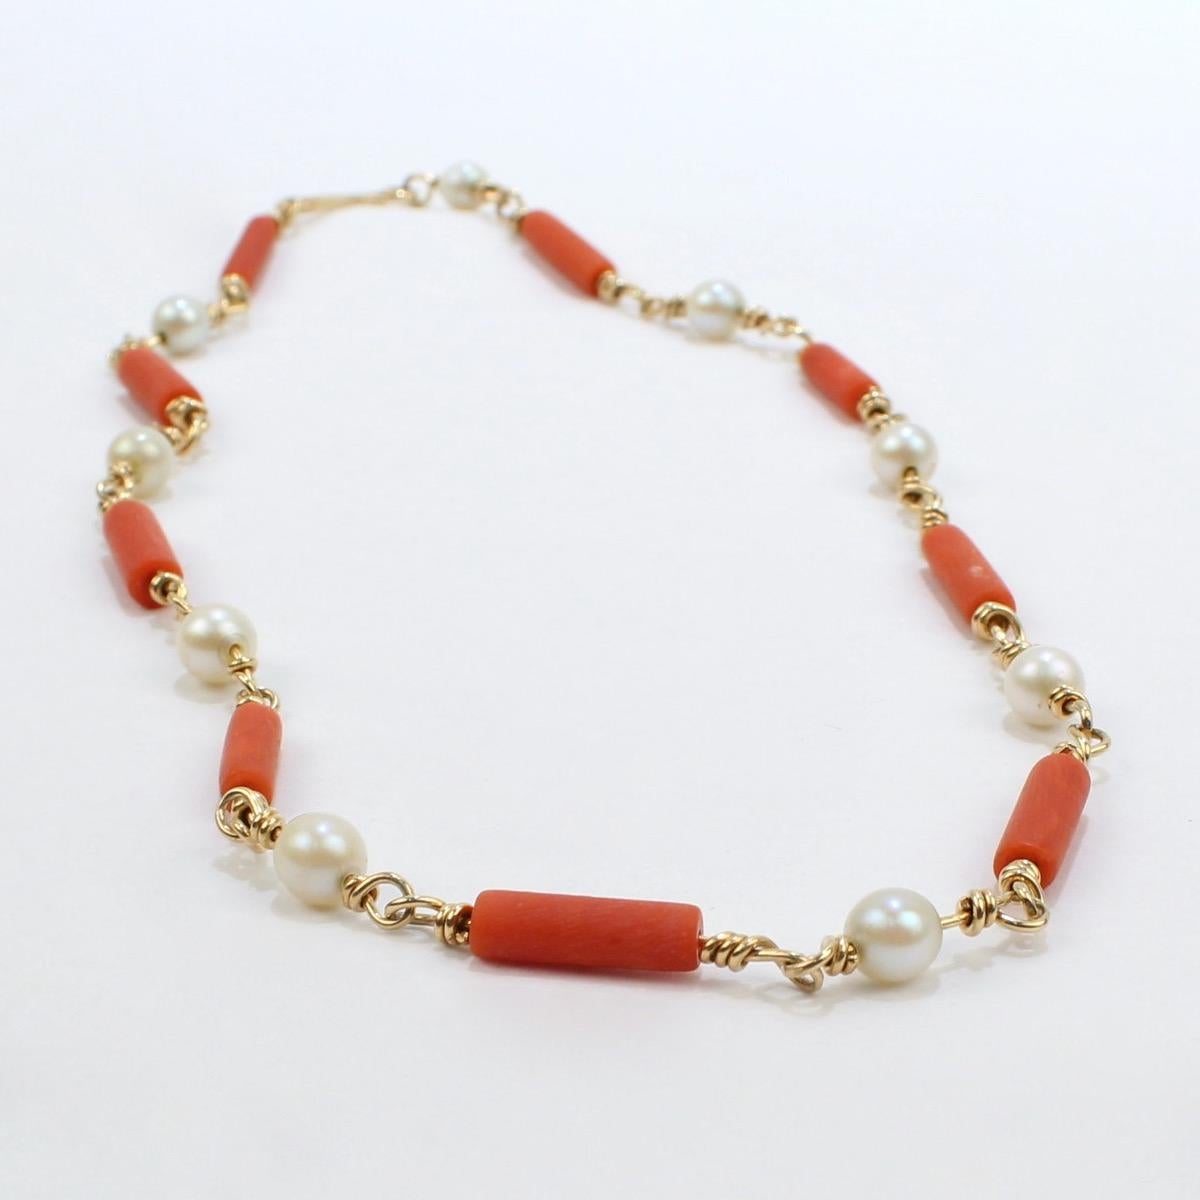 A very fine Henry Steig coral & pearl choker necklace.

In 14k yellow gold with alternating links of gold wire and round white pearls or salmon red coral beads. 

A simple and beautiful design from an important American Modernist!

Date:
20th